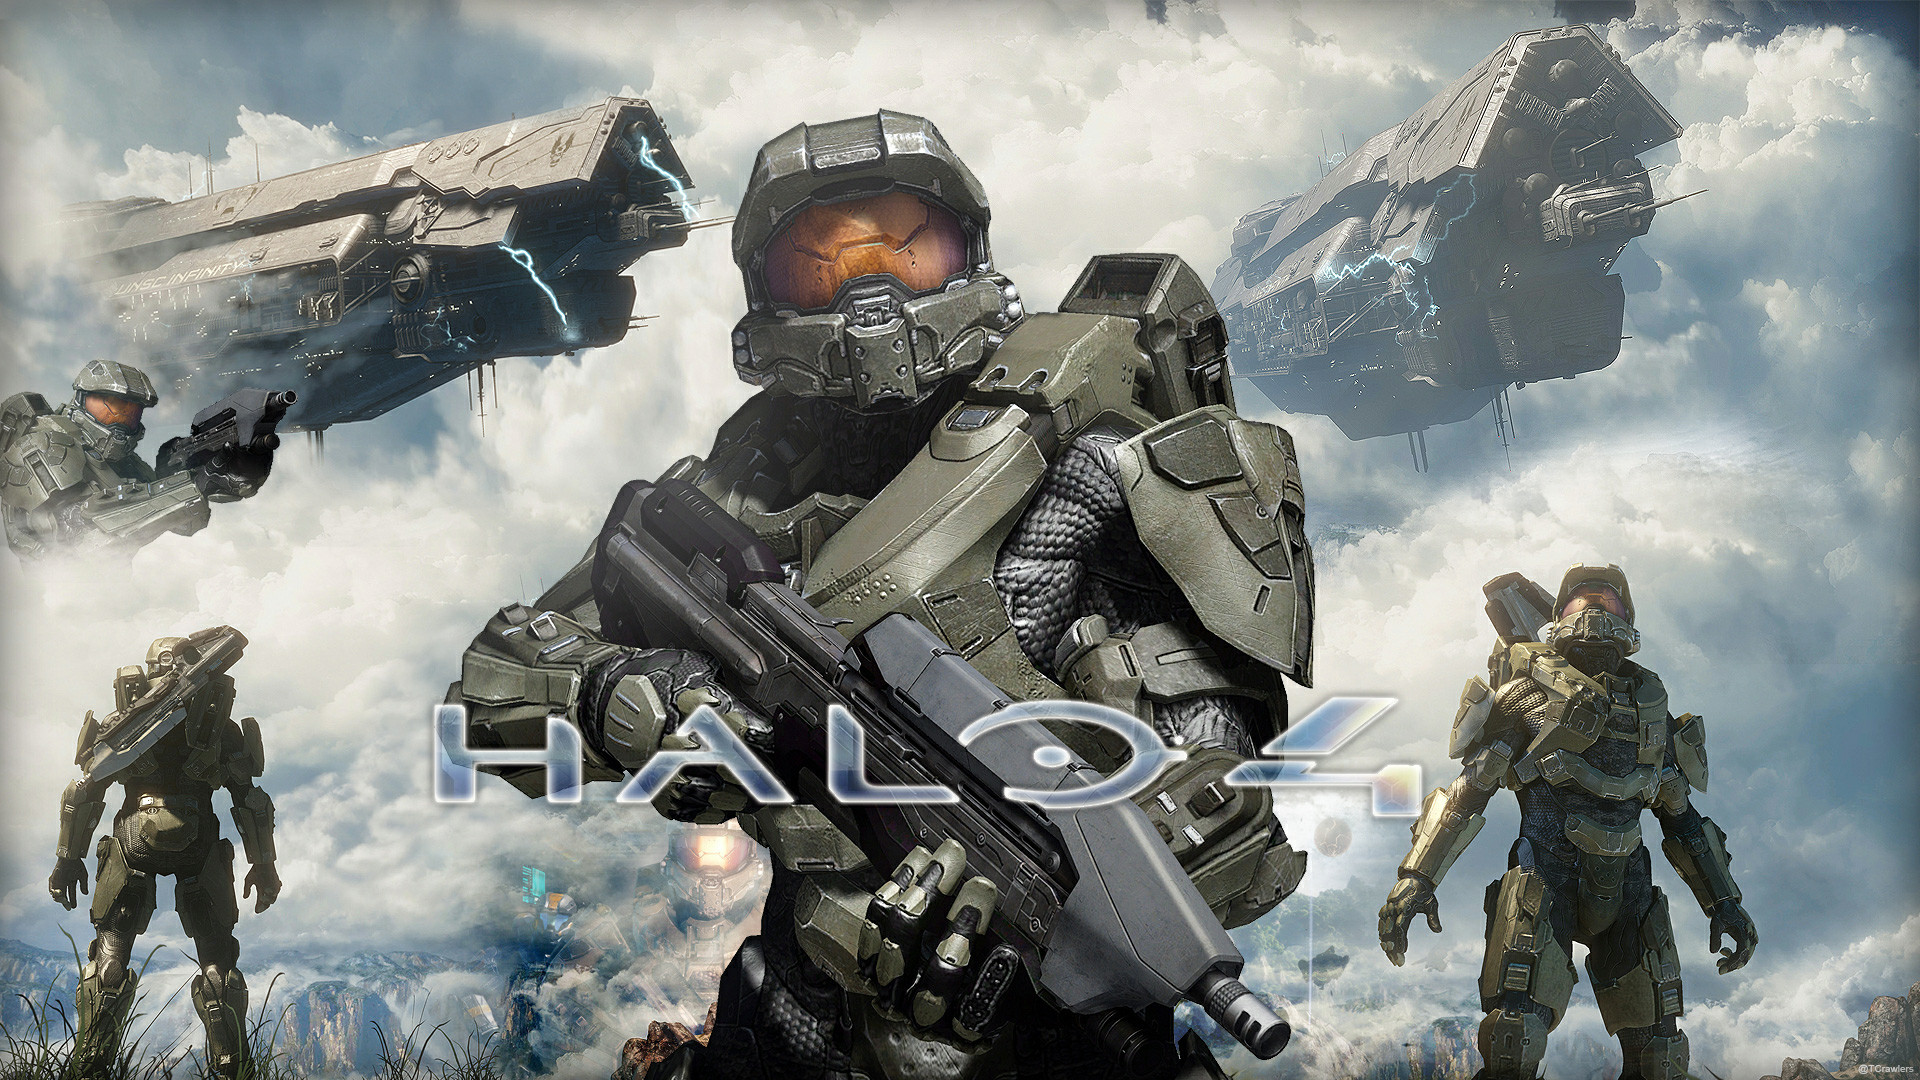 Halo 4 Wallpapers in HD